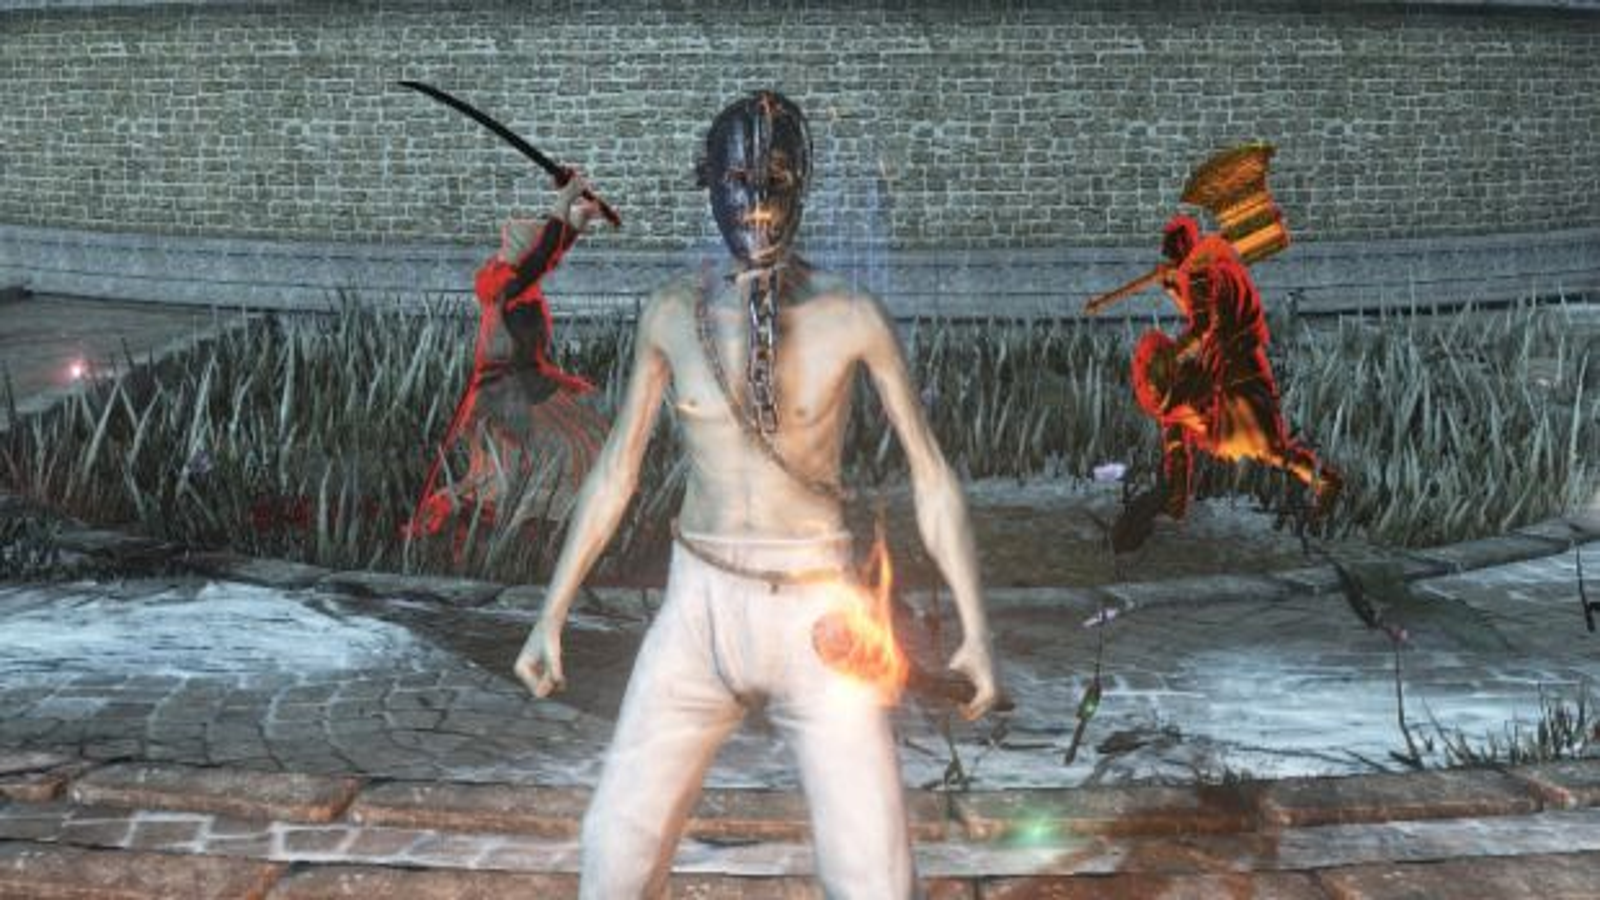 The rat king covenant is the absolute most fun I've had with all of souls :  r/DarkSouls2